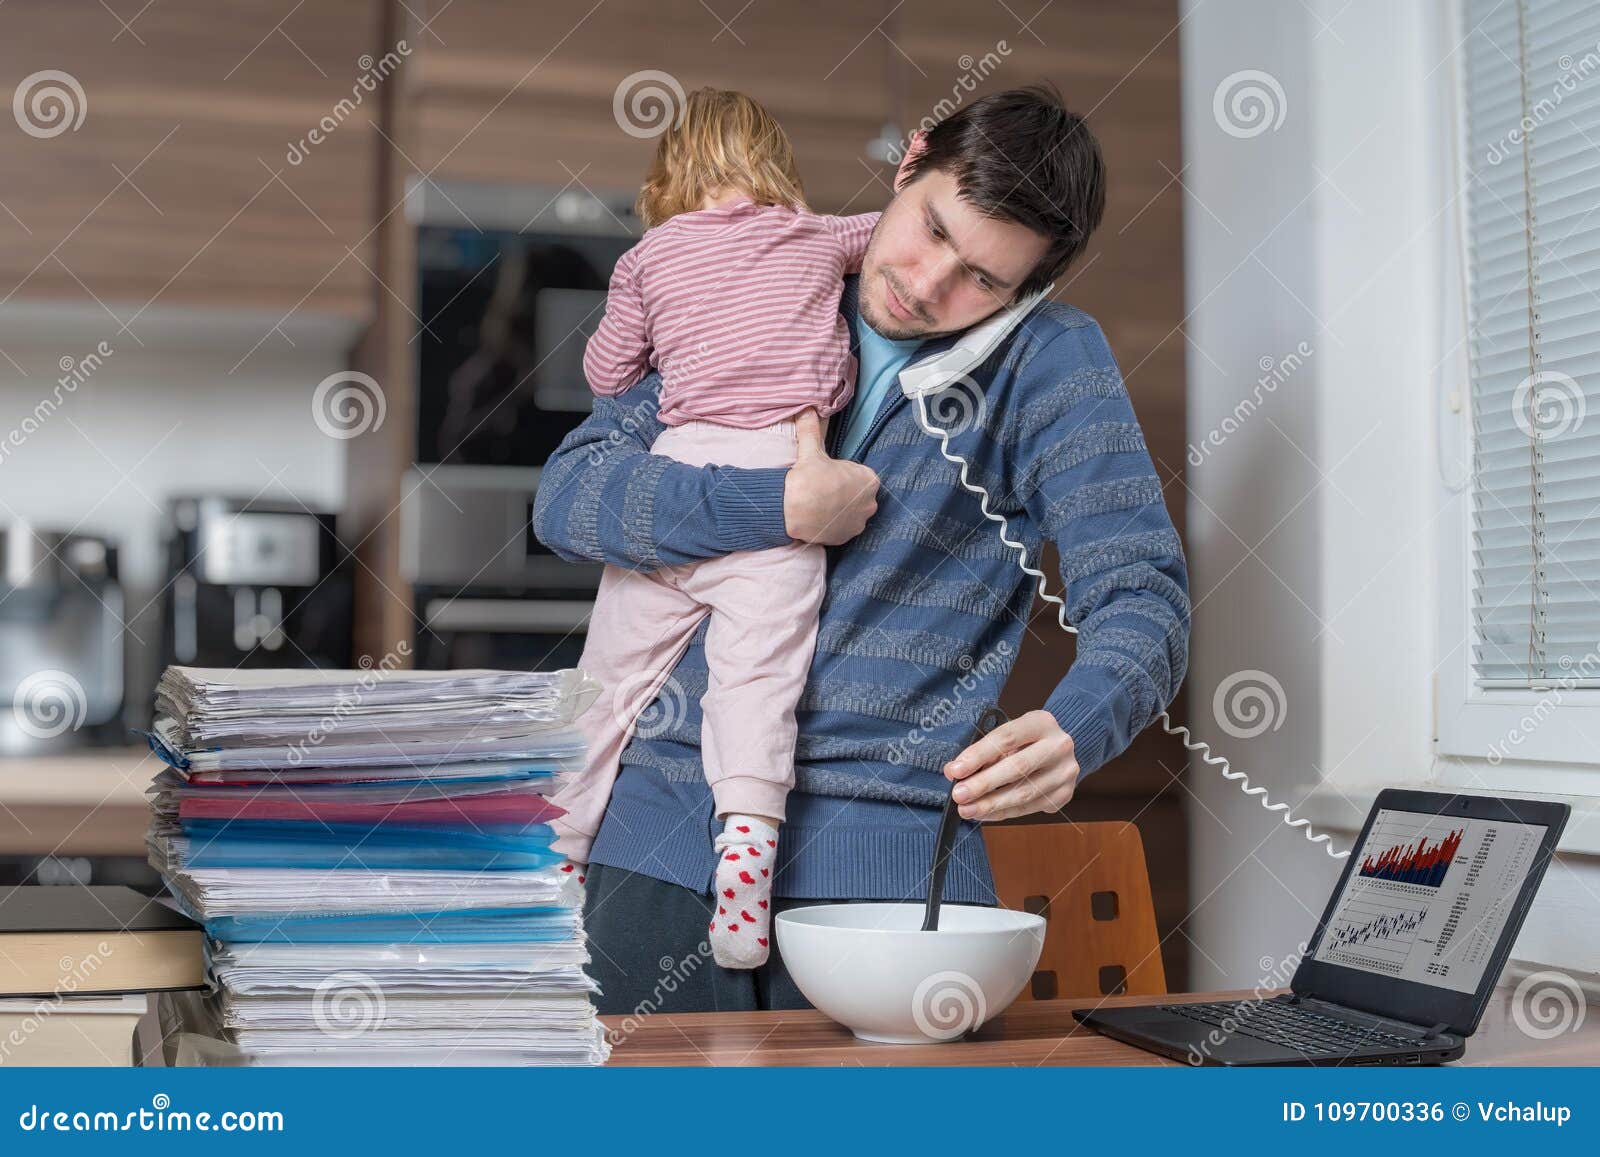 multitasking father is babysitting and working at home